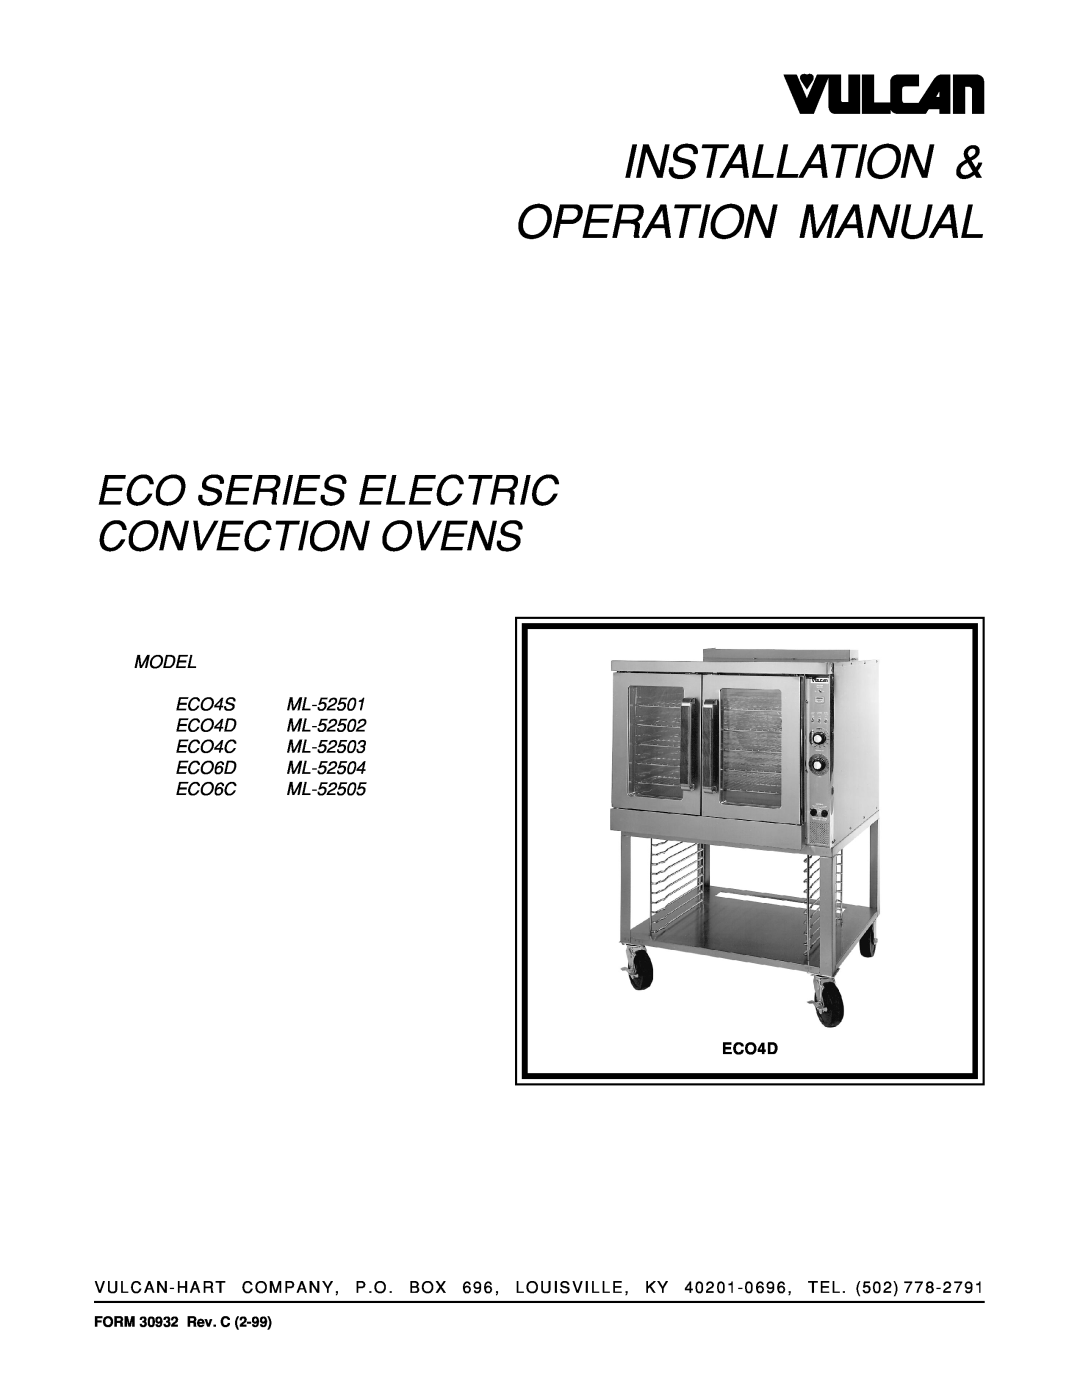 Vulcan-Hart ECO4C ML-52503 operation manual Eco Series Electric Convection Ovens, MODEL ECO4S ML-52501 ECO4D ML-52502 